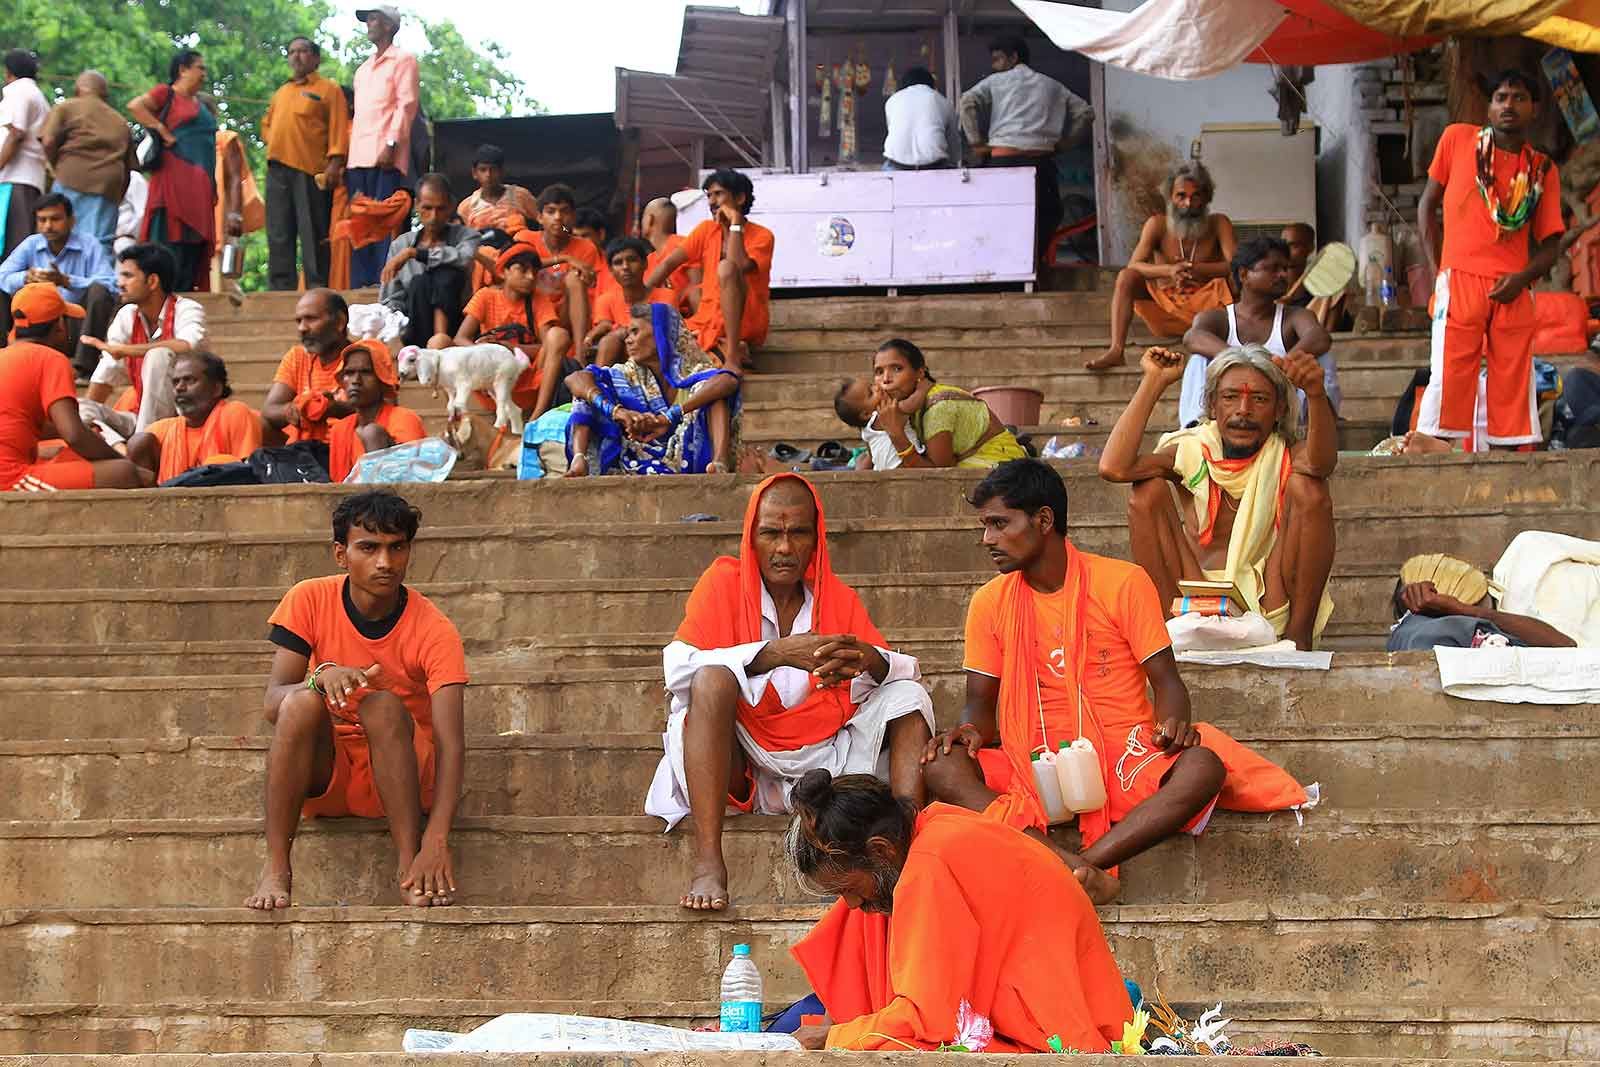 The Ghats in Varanasi are always full with people, bathing, washing or praying.